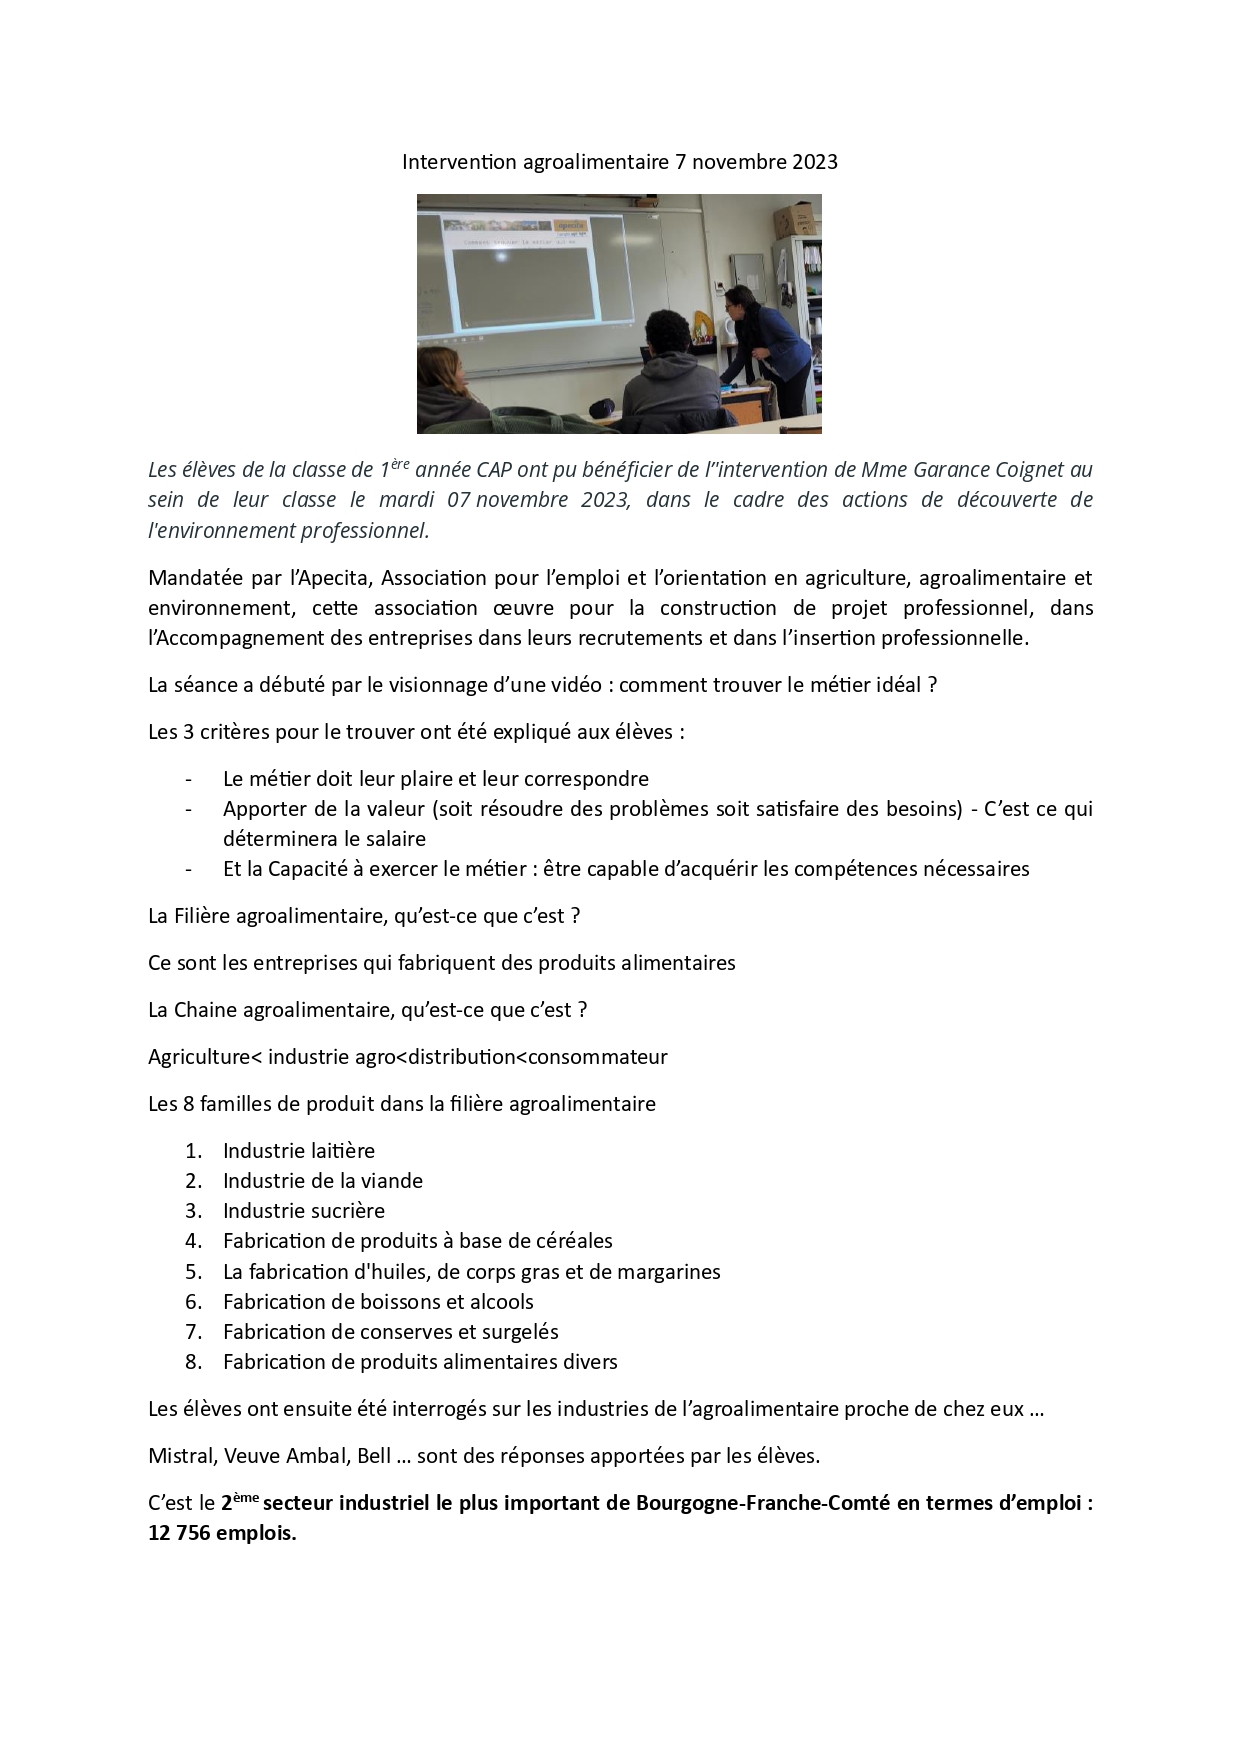 Article site Internet Intervention agroalimentaire 7 novembre 2023 page 0001